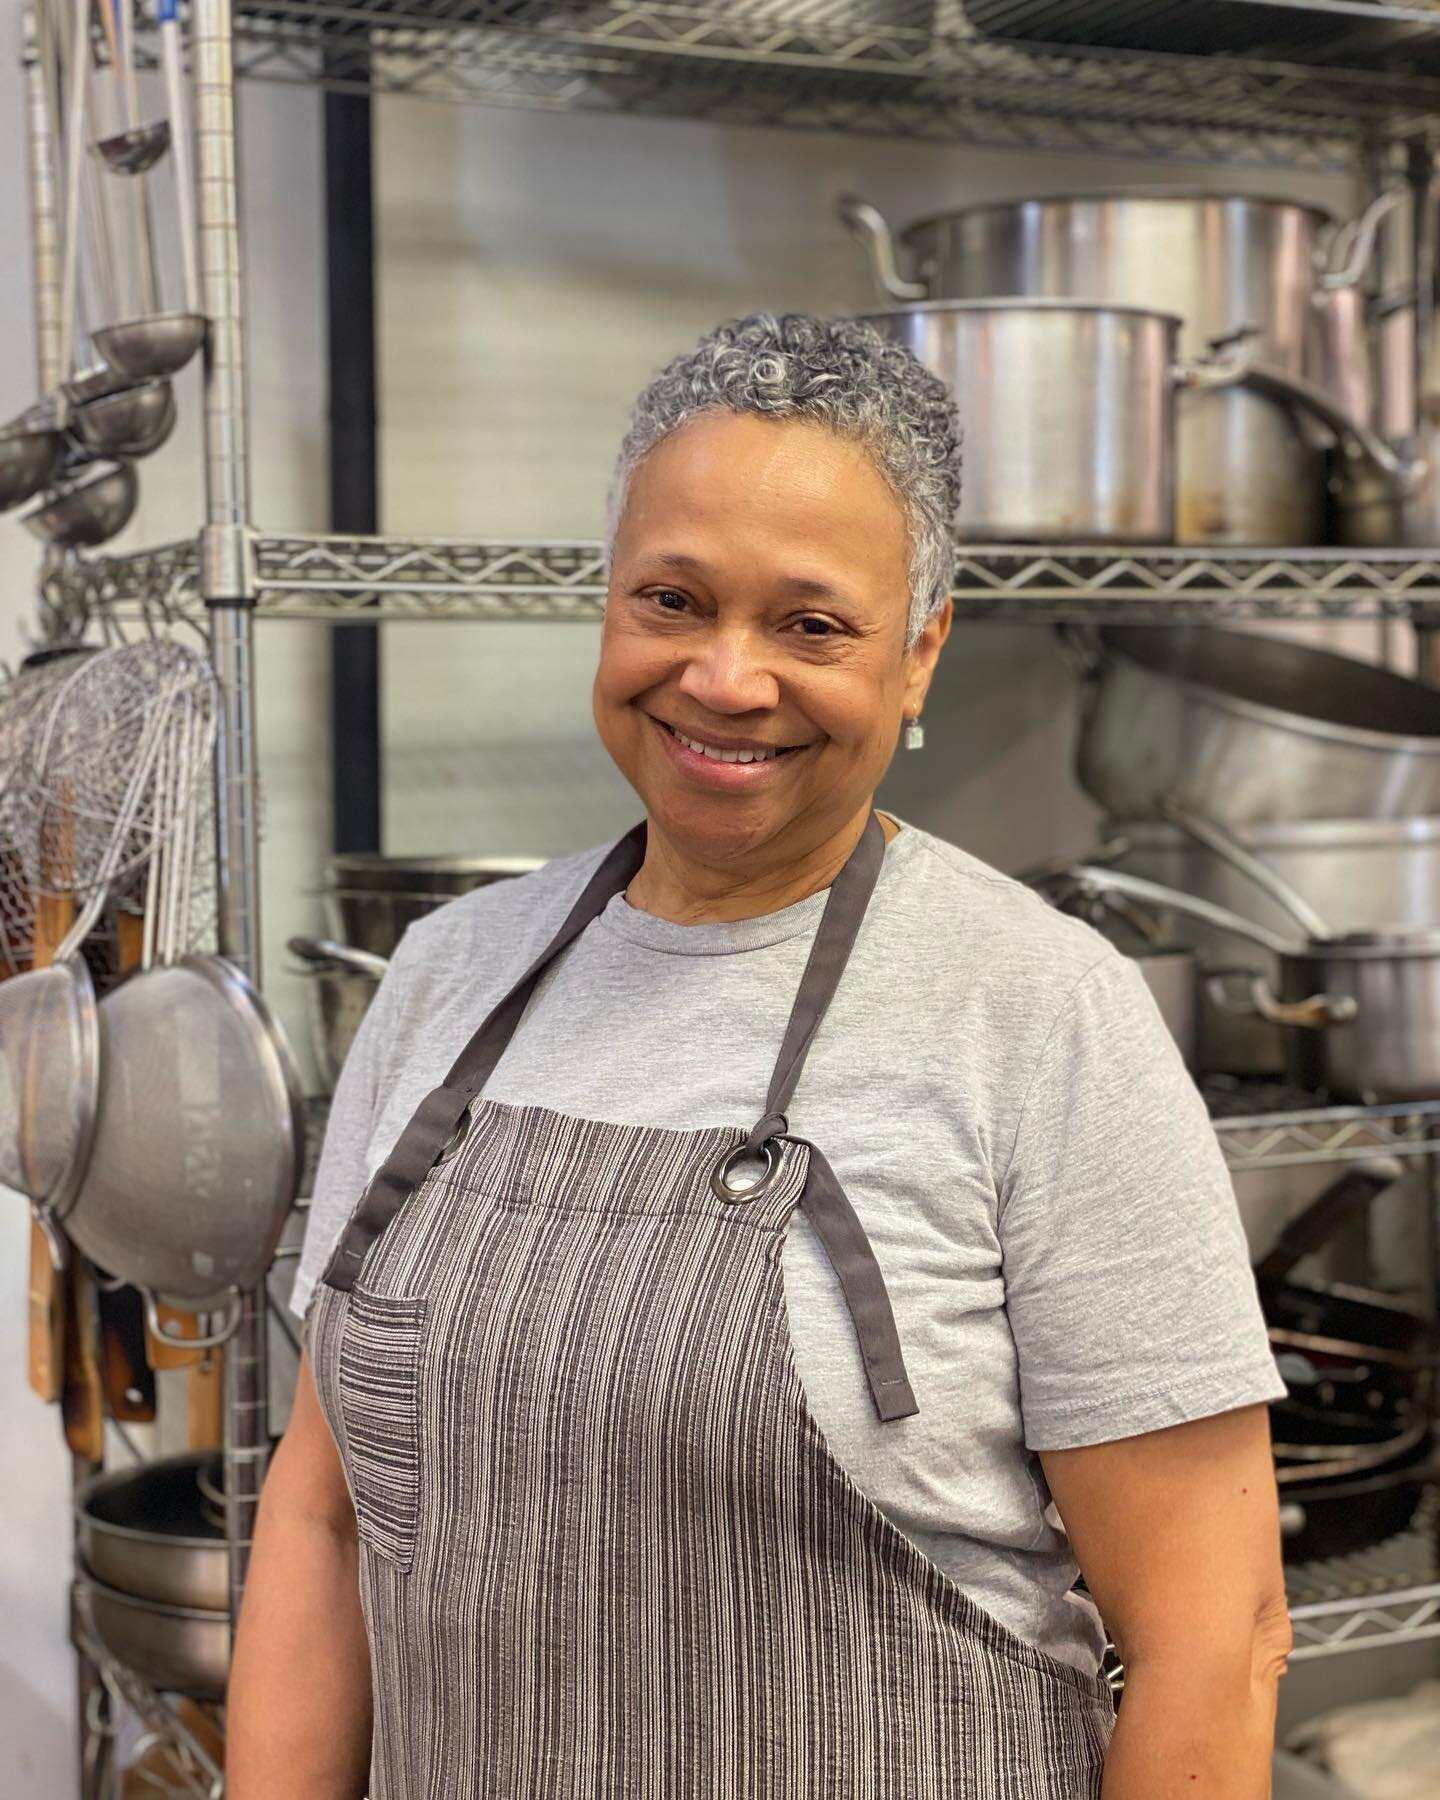 Join us in welcoming Pat to the @ginghammarket &amp; Gatherings team! You may recognize her from @patskitchentable and her tasty granola that we carry in the market. 

Say &ldquo;hello&rdquo; when you see Pat next!

#ginghammarket #gatheringskitchen 